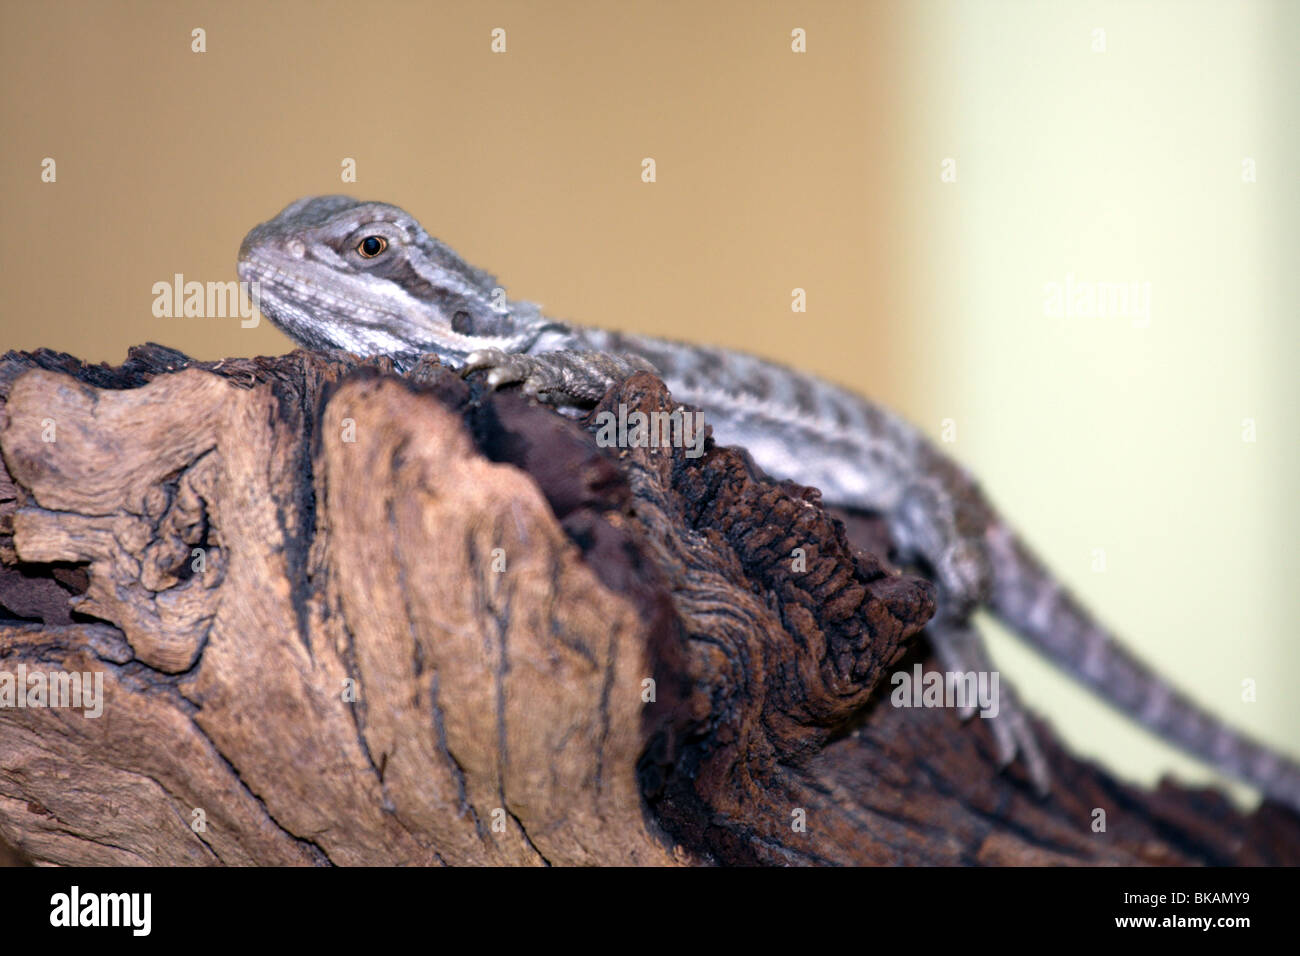 Young 'Bearded dragon' lizard on the wooden branch. Stock Photo